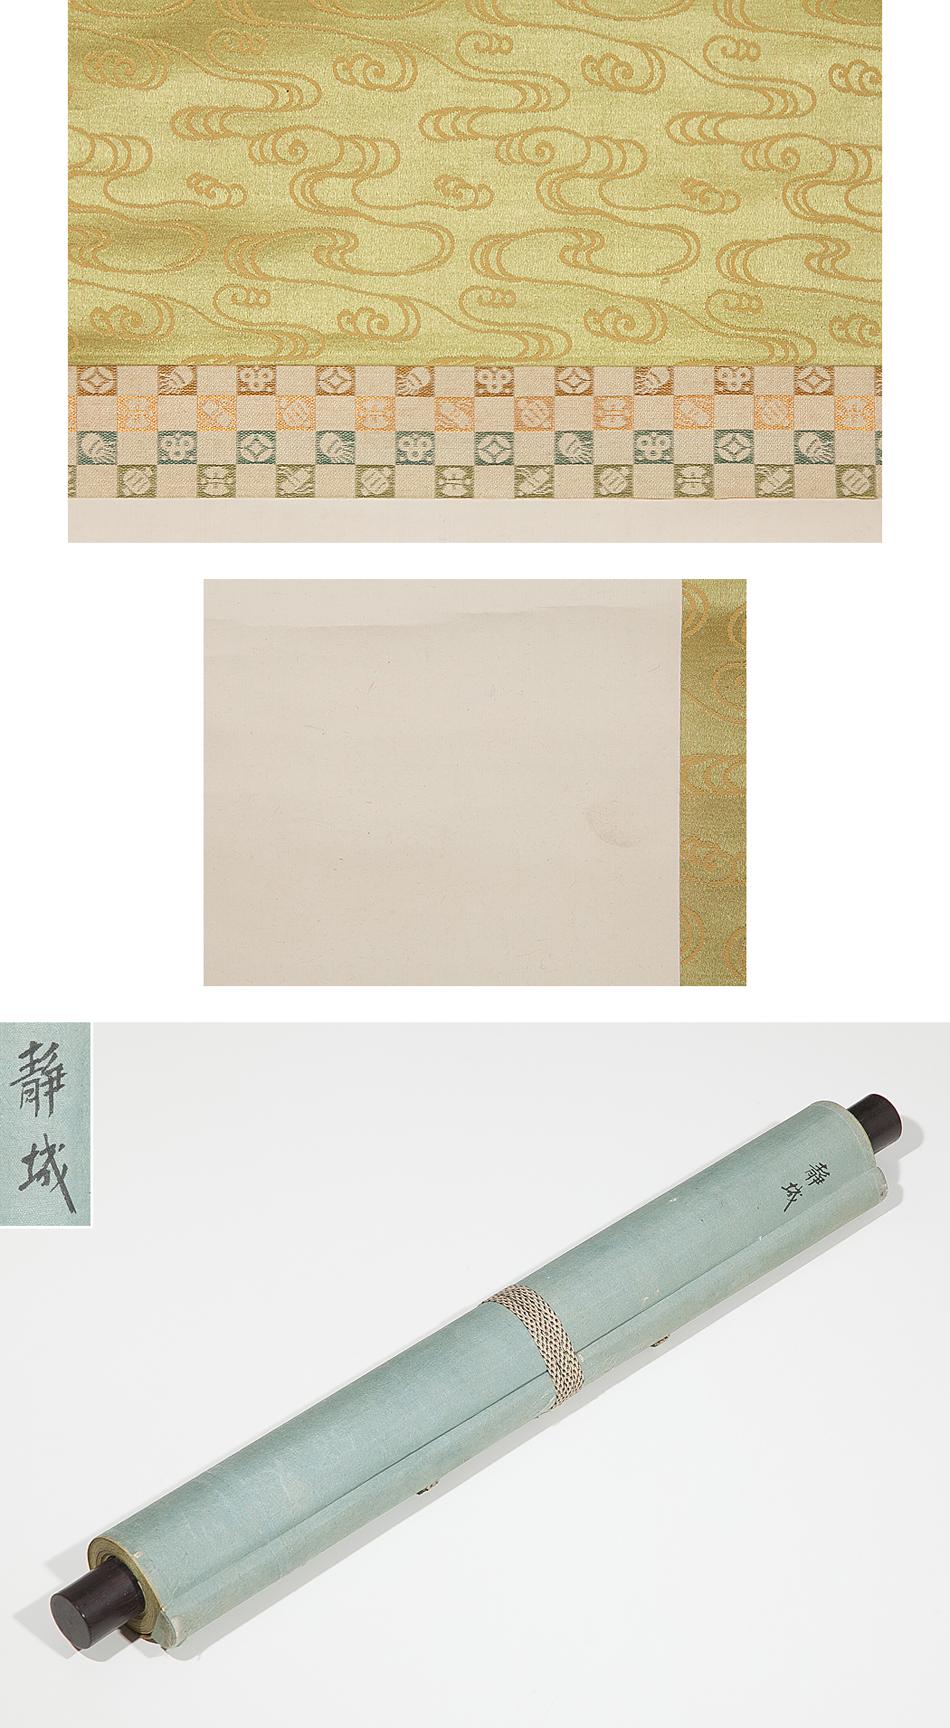 Name Kakejiku Calligraphy Kikuzu Paper Book Coloring Inscription (Shizushiro)
Size Axis: 195 cm in length, 42.5 cm in width, 131.5 cm in length, 31.5 cm in width *
Status I don't know the details of the author, but this product is hand-drawn, not